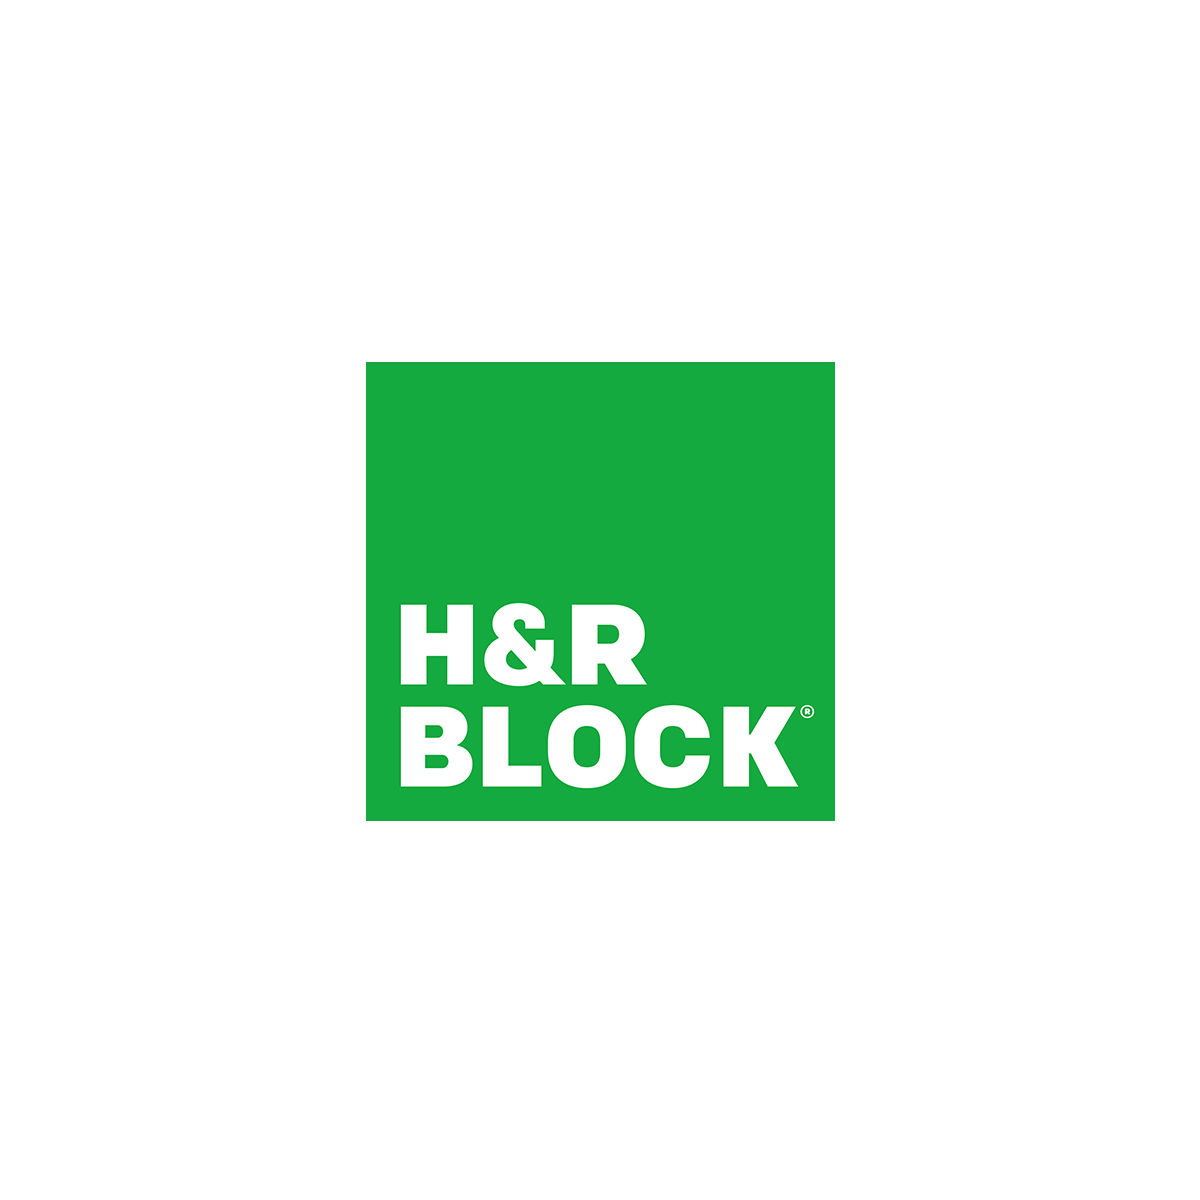 H&R Block and Inkling